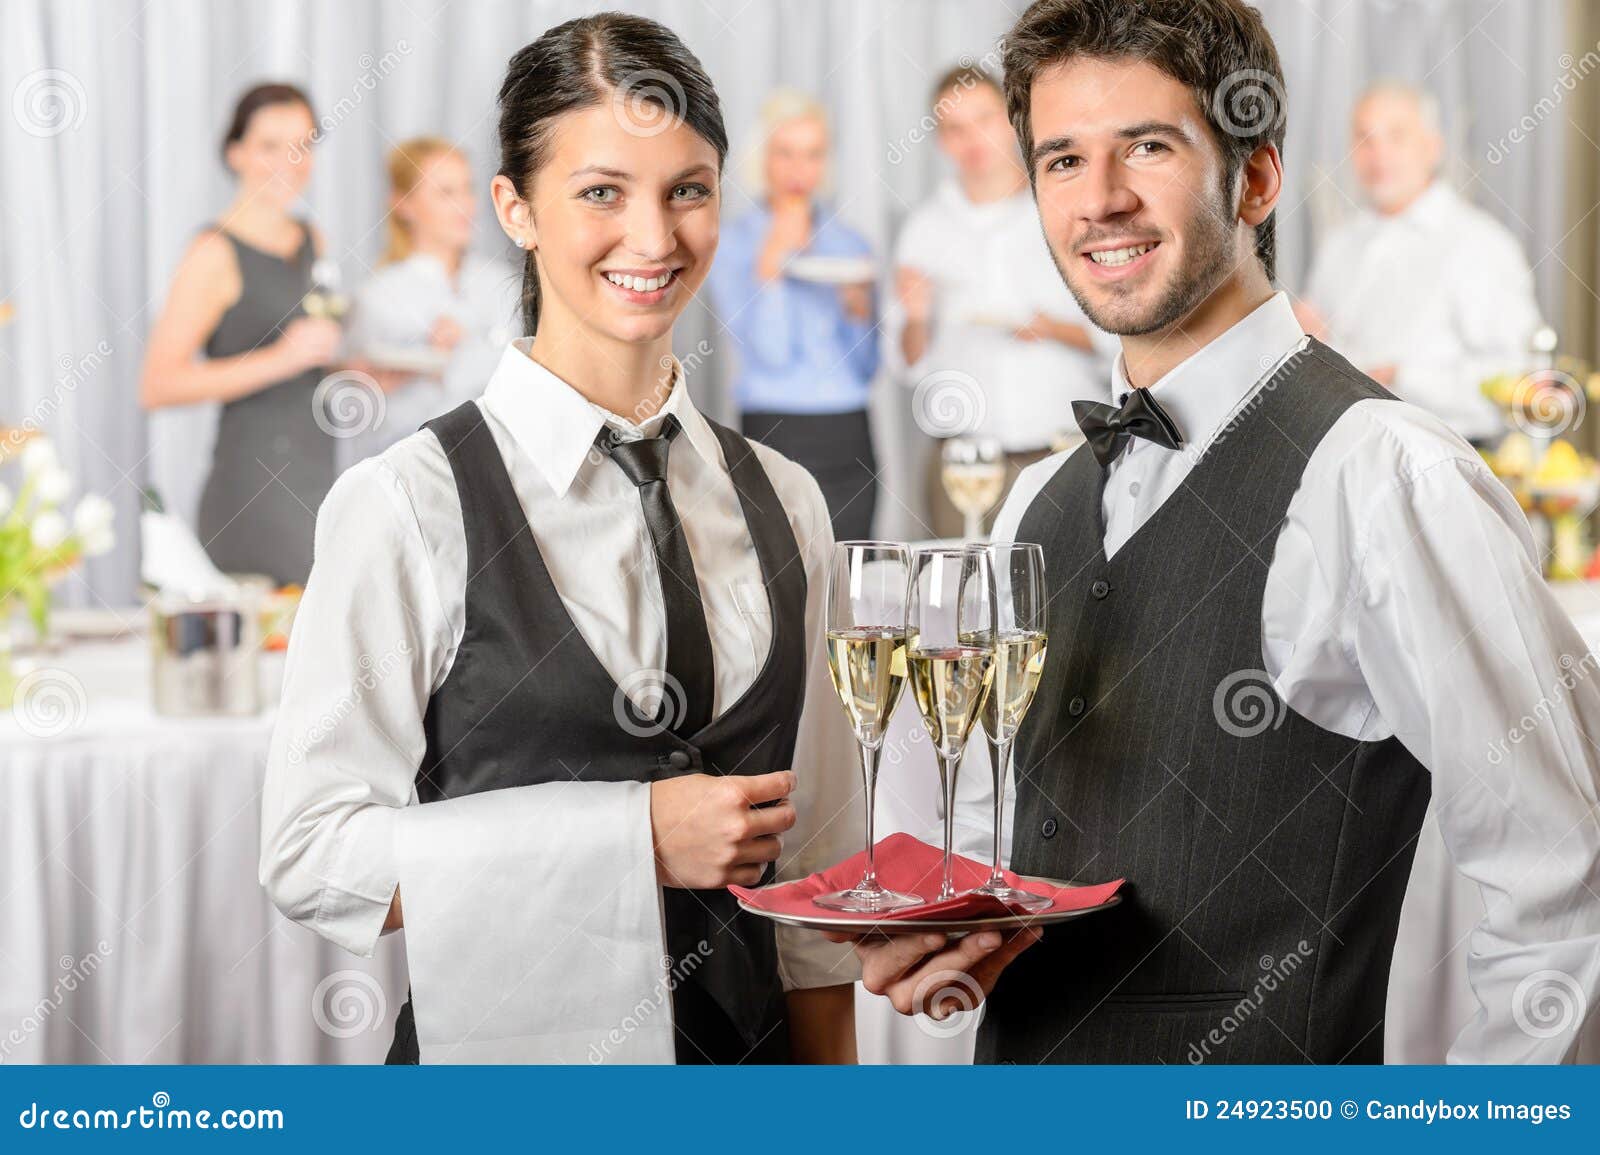 professional catering service